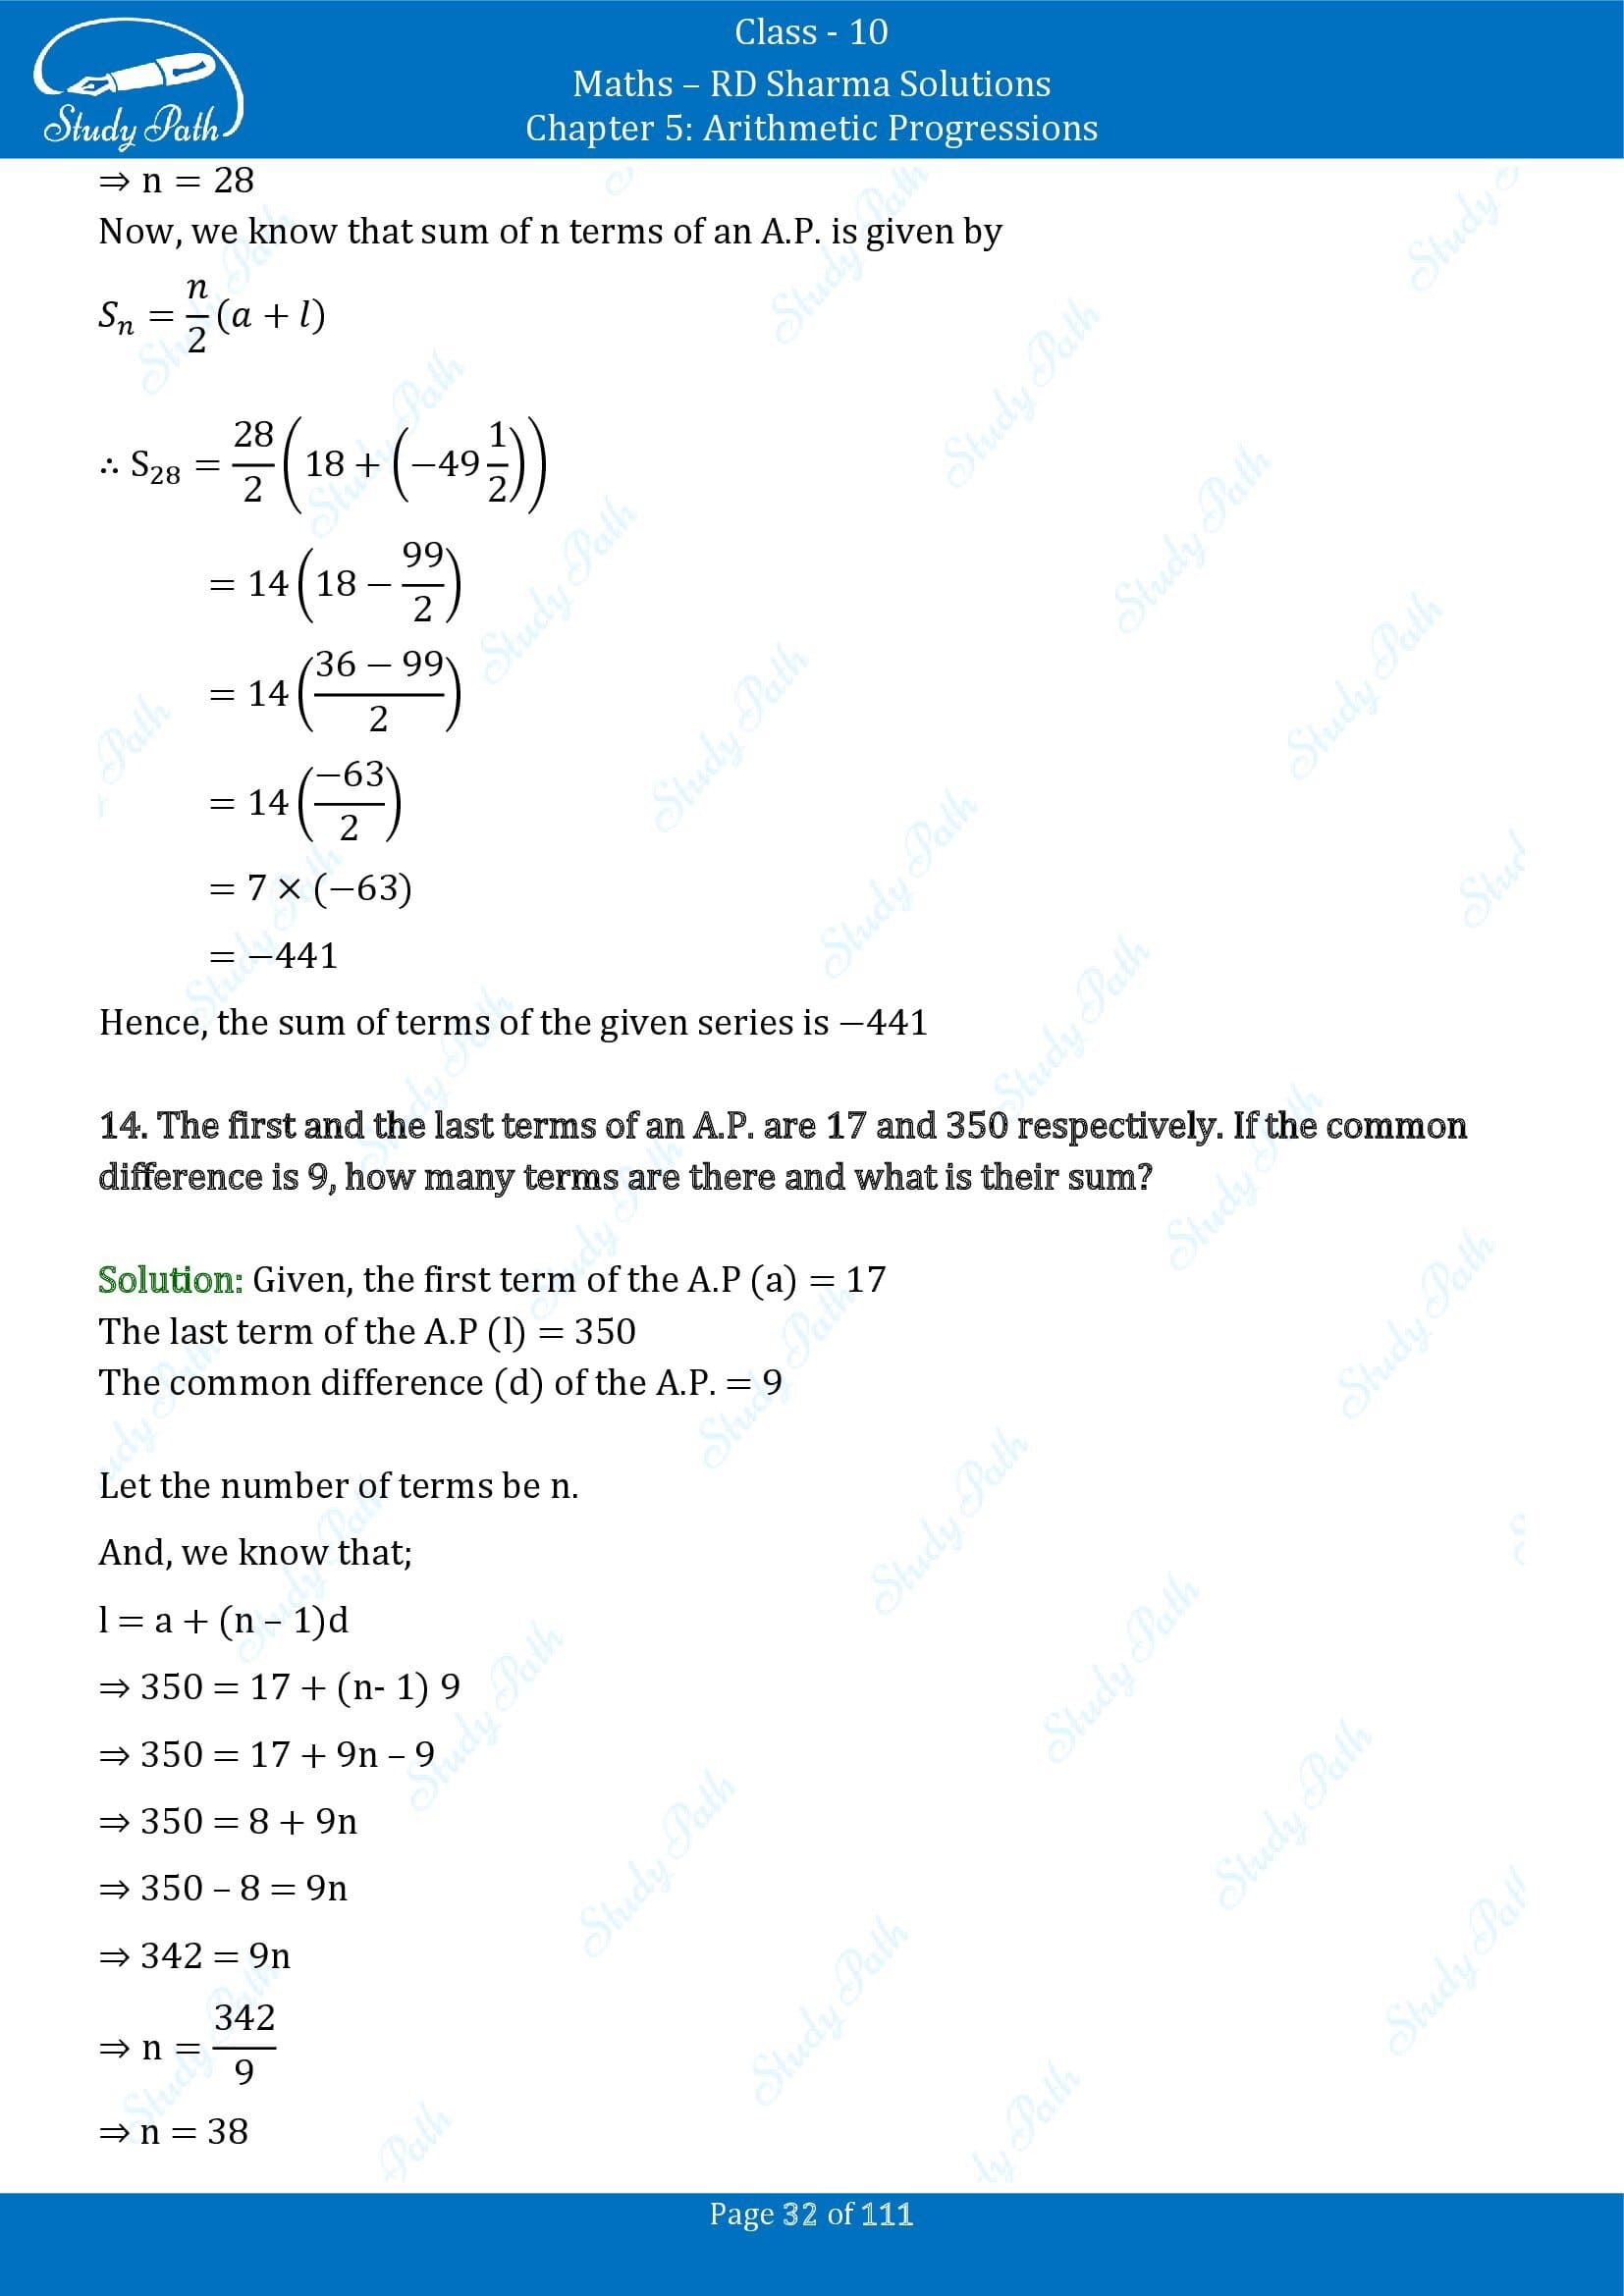 RD Sharma Solutions Class 10 Chapter 5 Arithmetic Progressions Exercise 5.6 00032